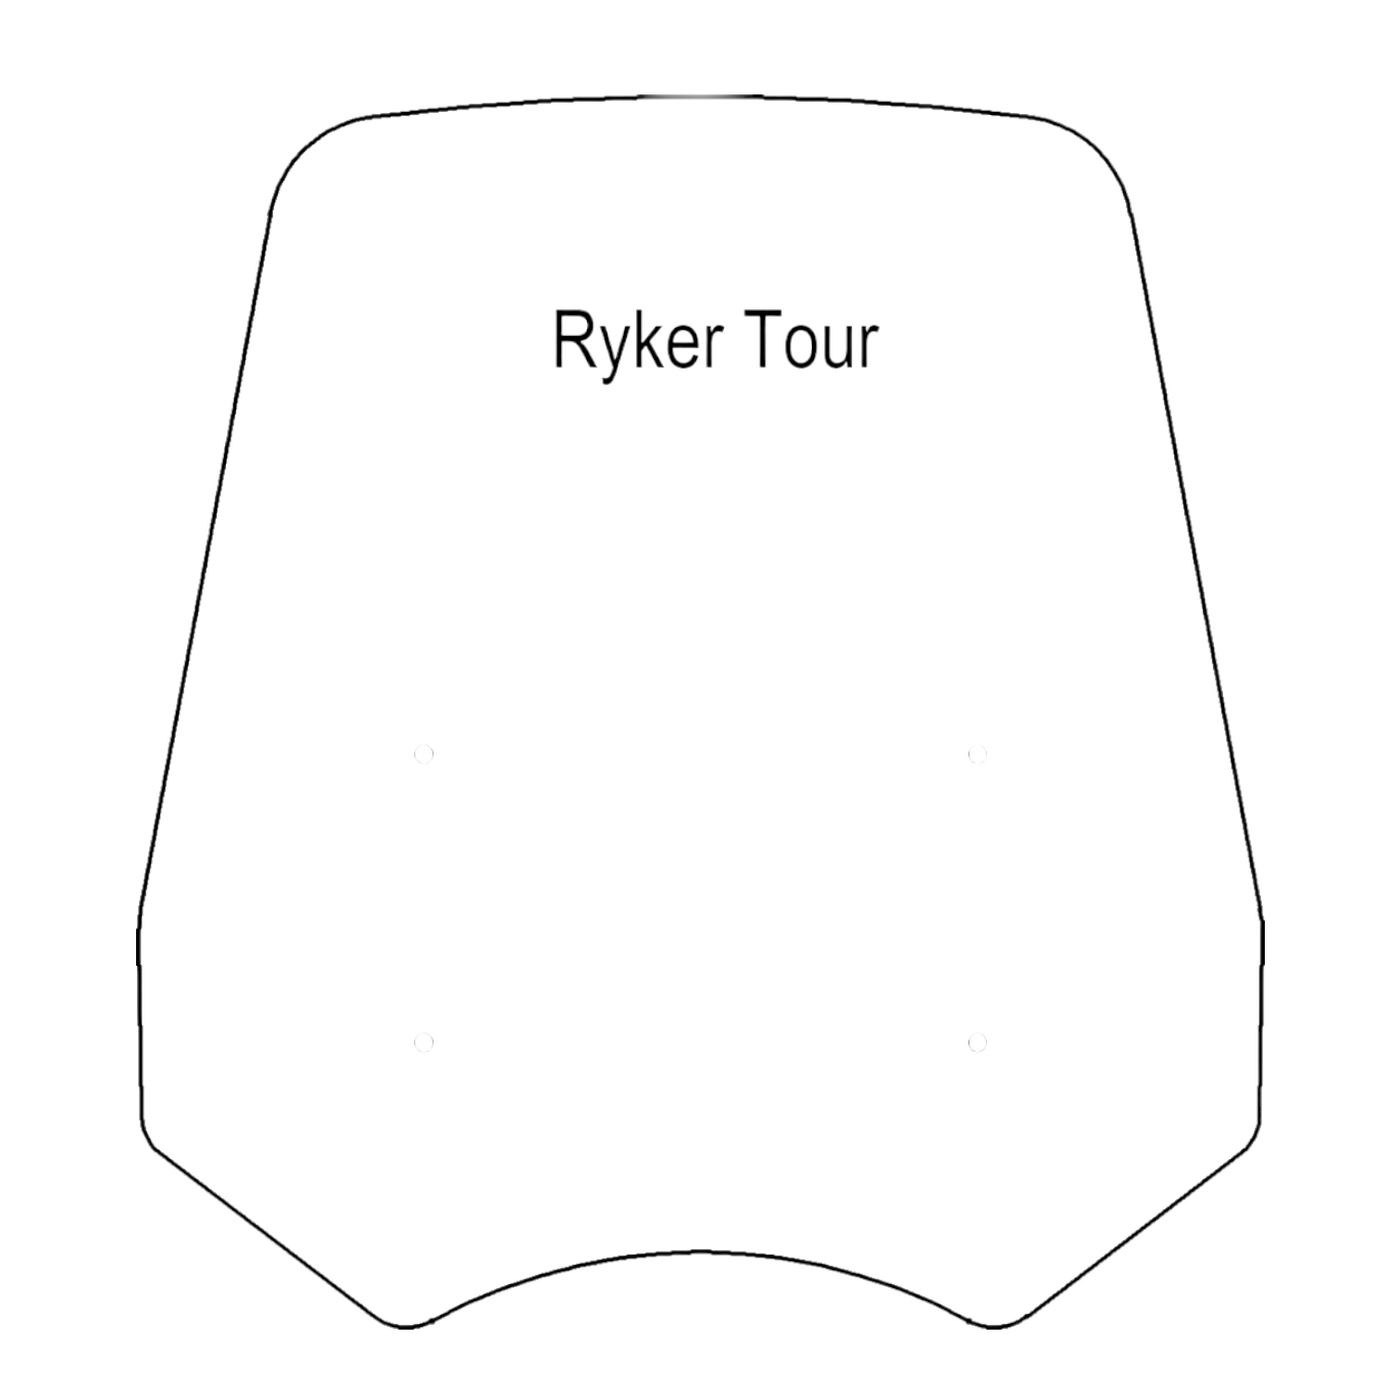 CERTIFIED PRE-OWNED - 18" Clear Replacement Windshield for Madstad System for Can-Am Ryker Touring